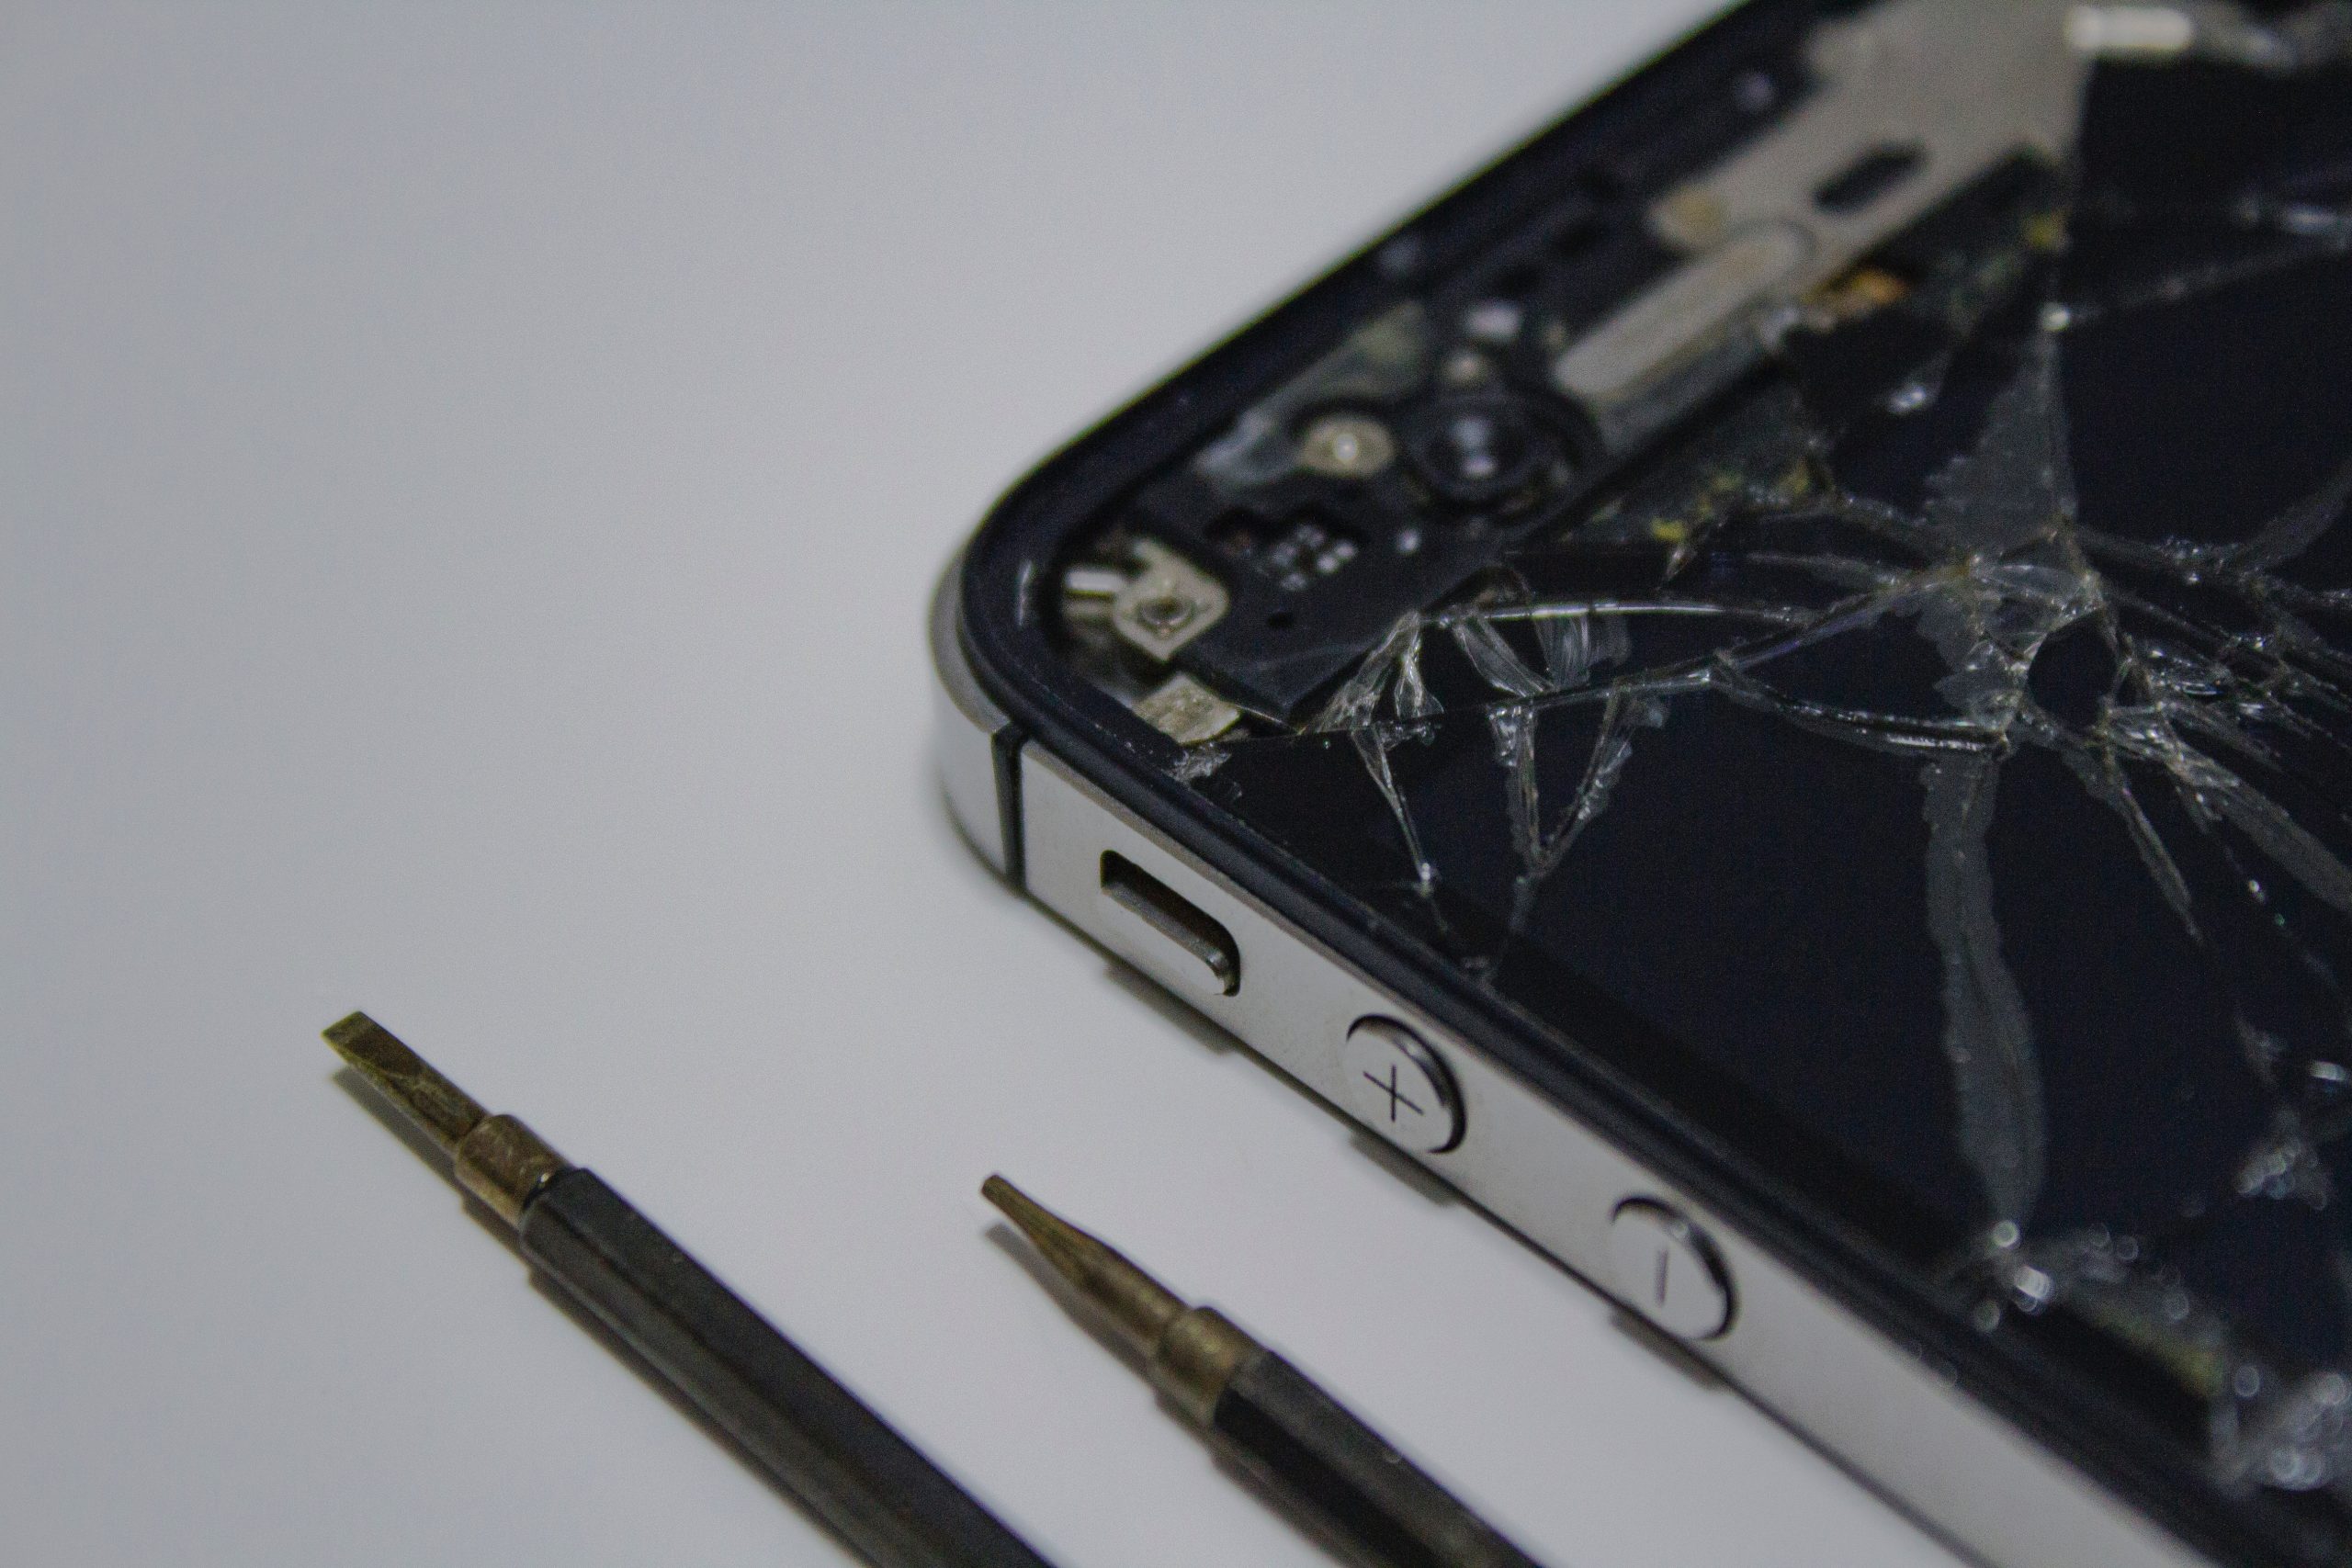 Cell phone repair: CD Solution brings your devices back to life